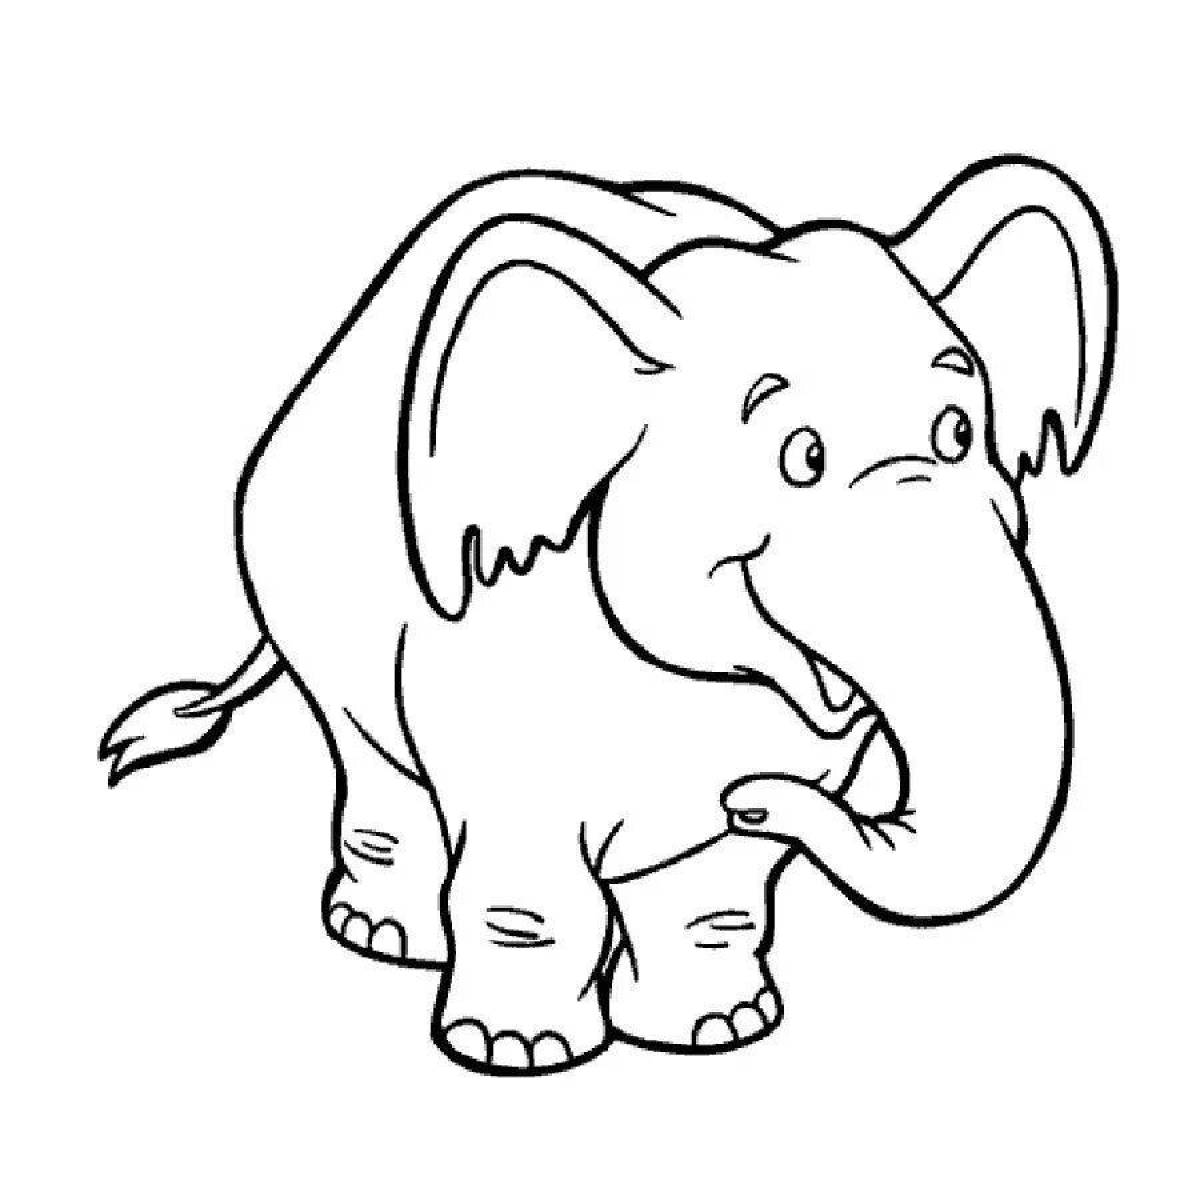 Living elephant coloring pages for kids